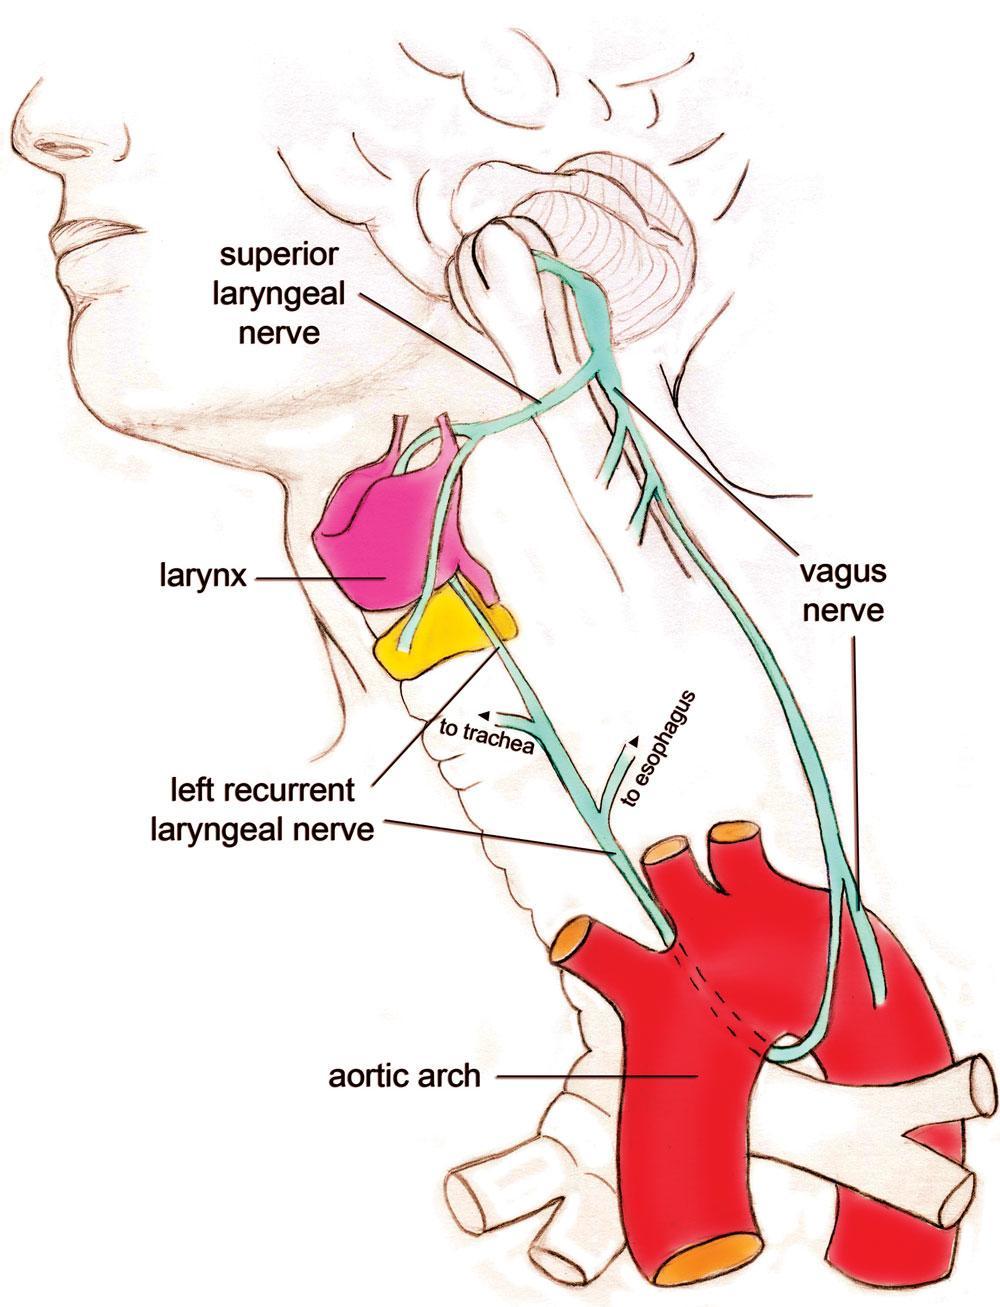 Nerve Supply and Semon s Law: 10 Motor: All intrinsic muscles are supplied by recurrent laryngeal nerve of vagus nerve EXCEPT cricothyroid, it s supplied by external laryngeal nerve of superior